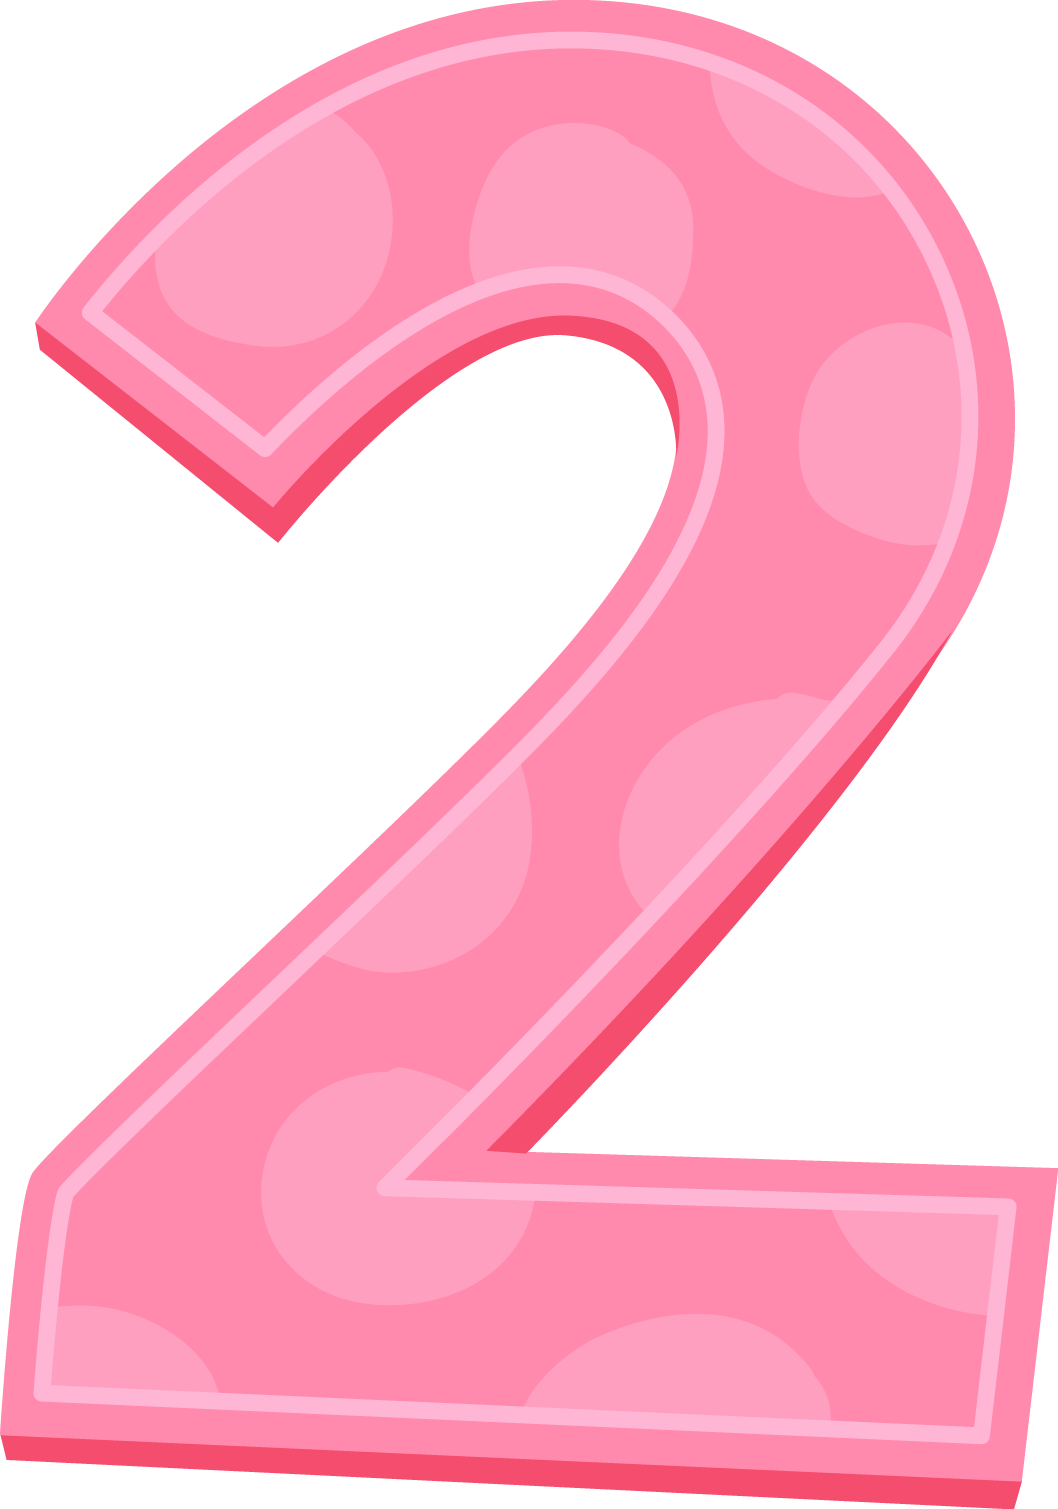 Number 3 clipart pink number two, Number 3 pink number two Transparent ...